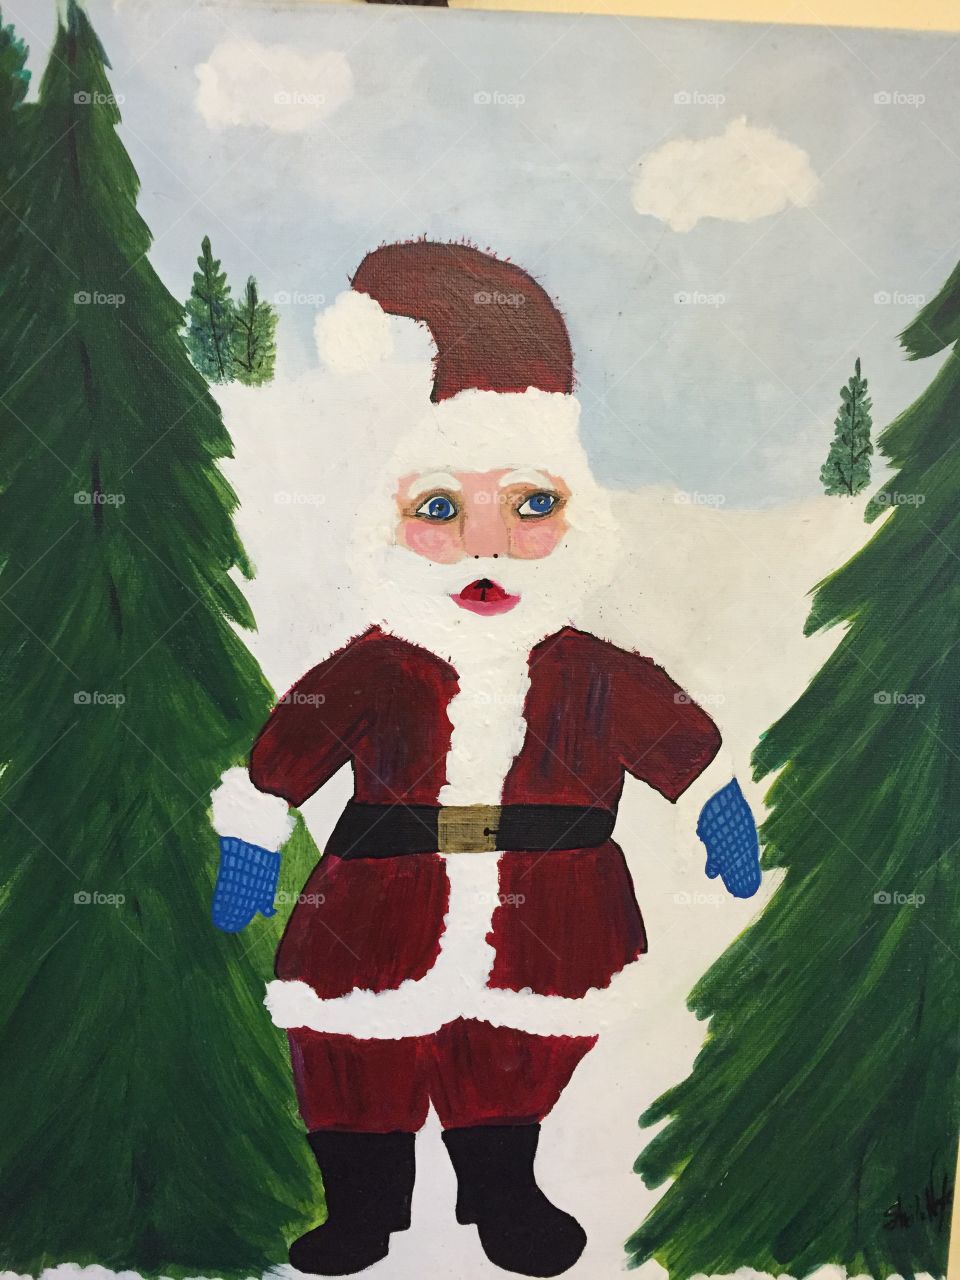 Whimsical Santa Clause painting done in Acrylic paint on canvas with snow and green trees.